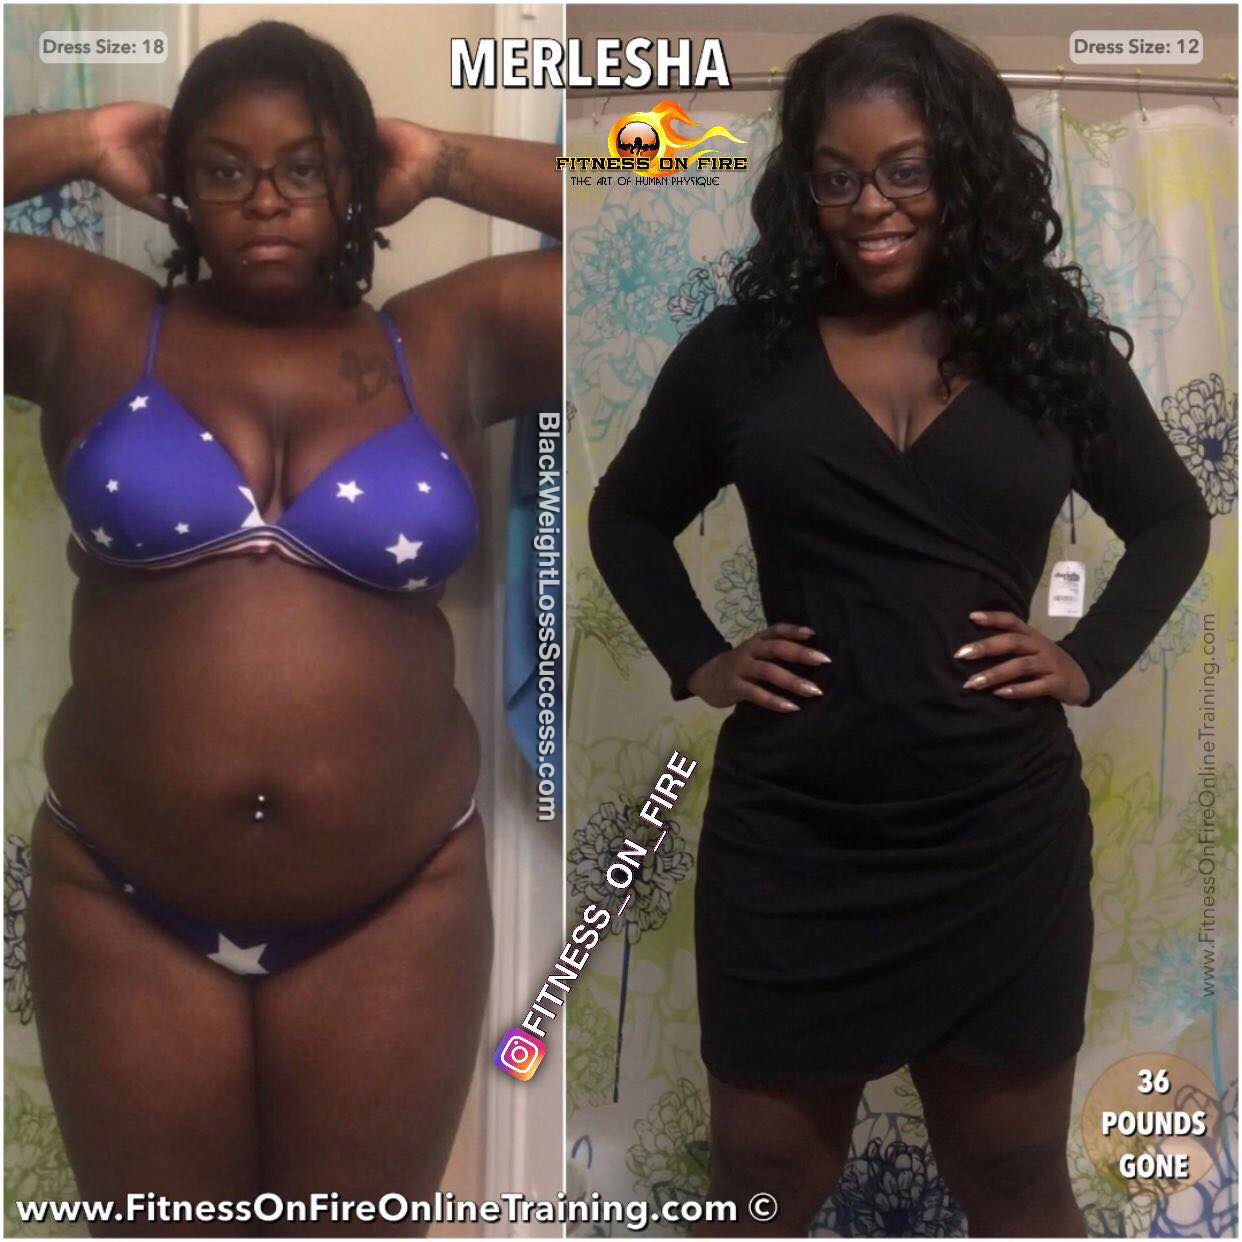 Merlesha before and after